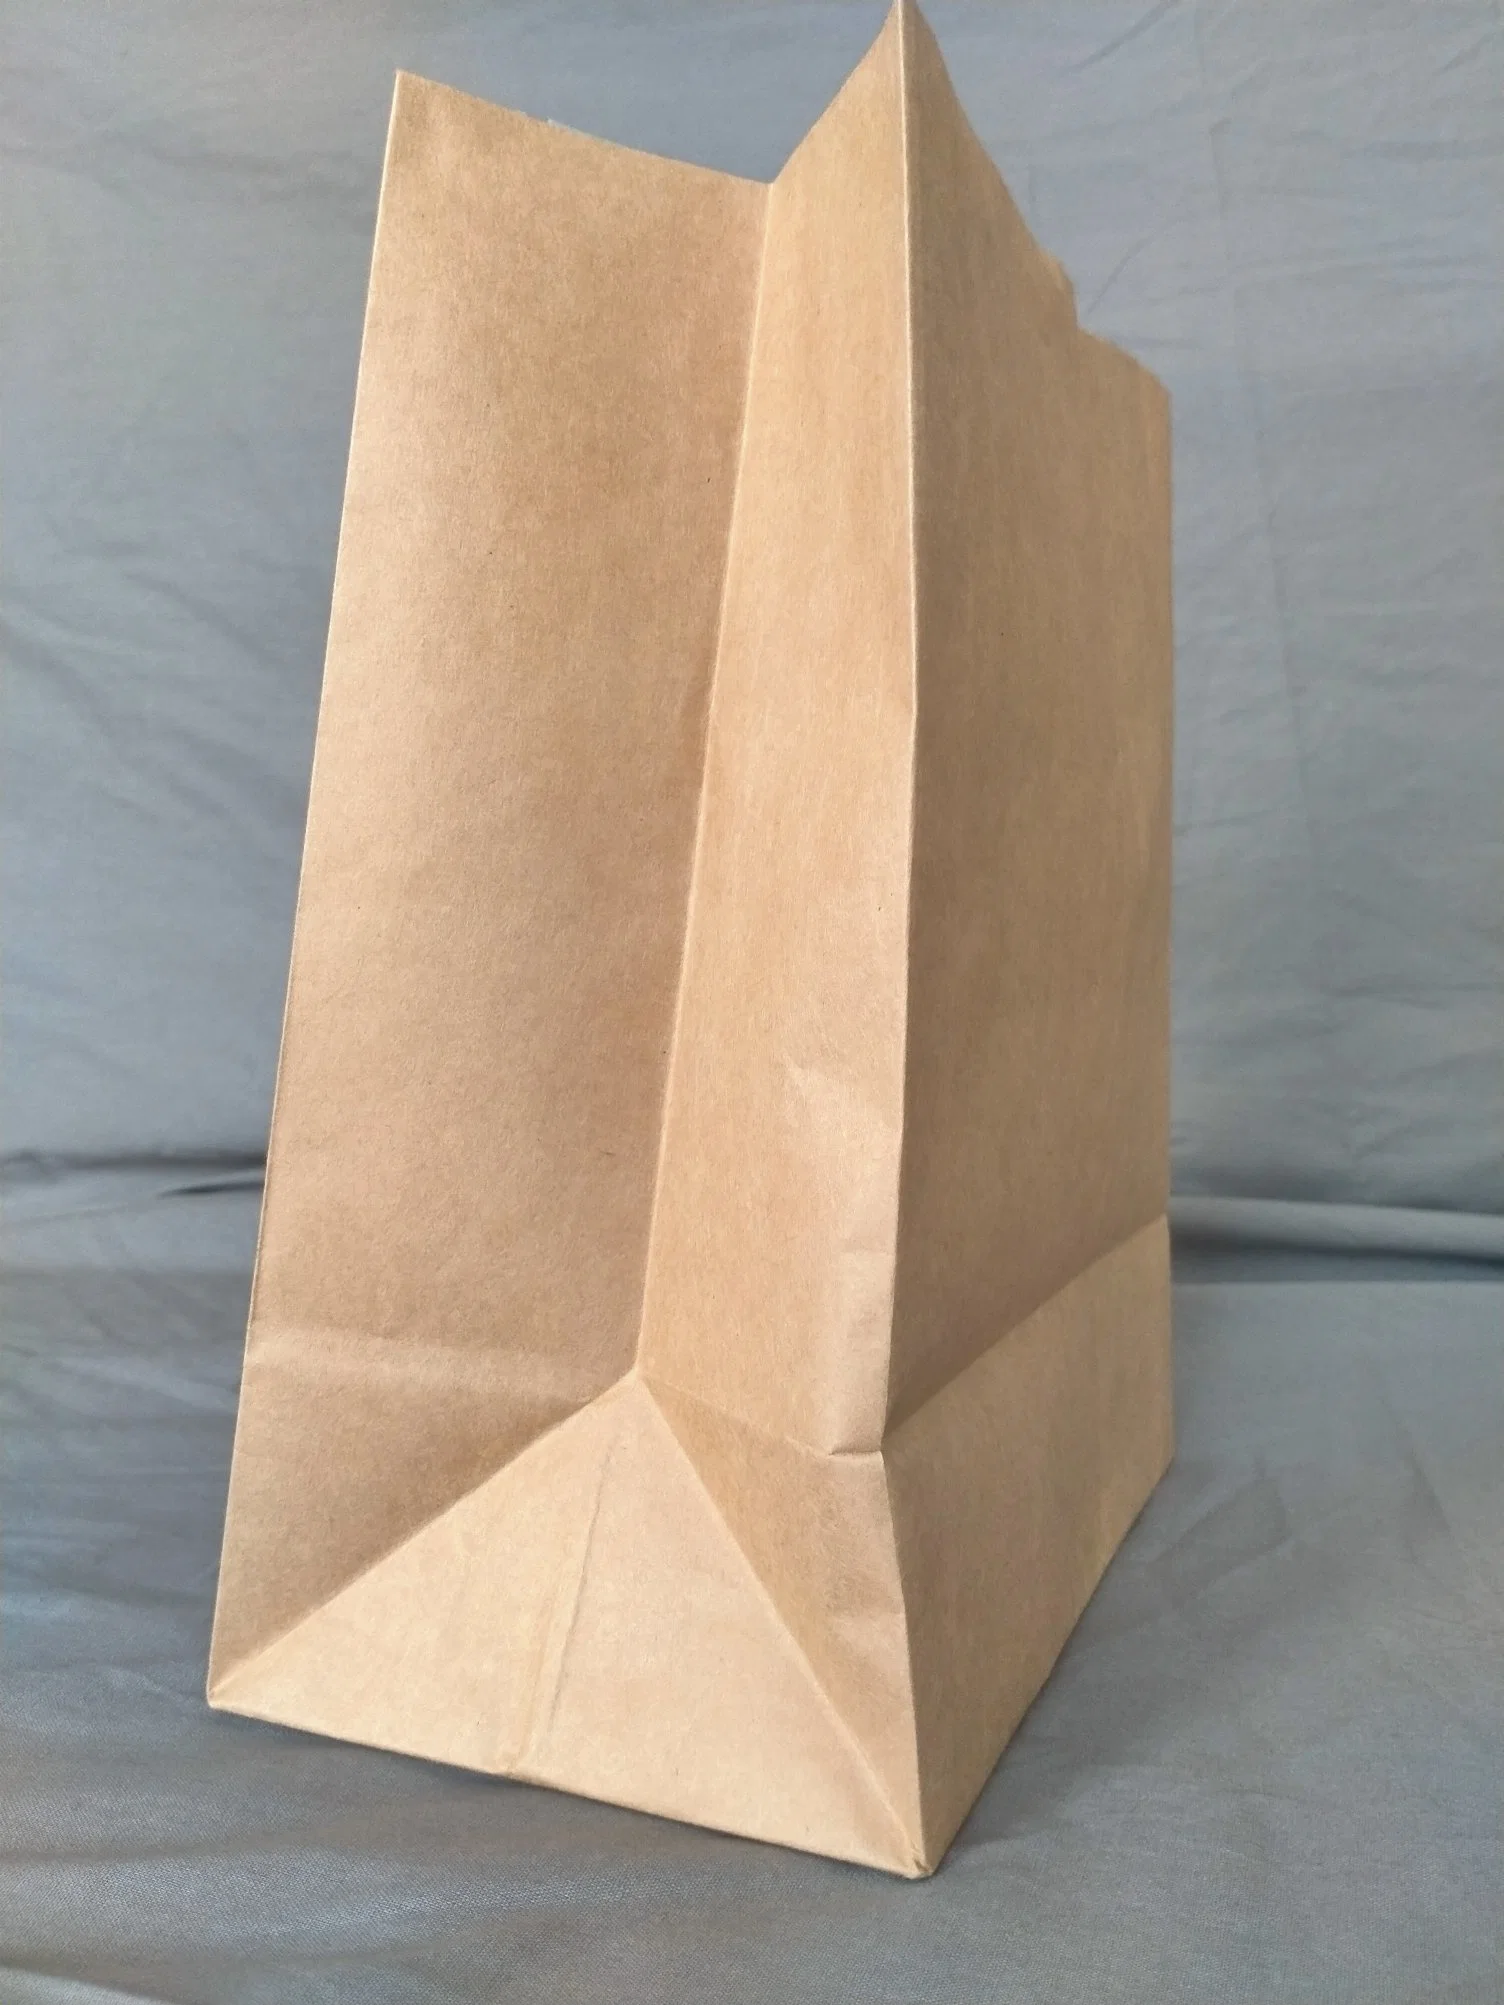 50 Lb Food Waste Disposable Compost Compostable 100% Biodegradable Brown Craft Kraft Waxed Paper Garbage Bags